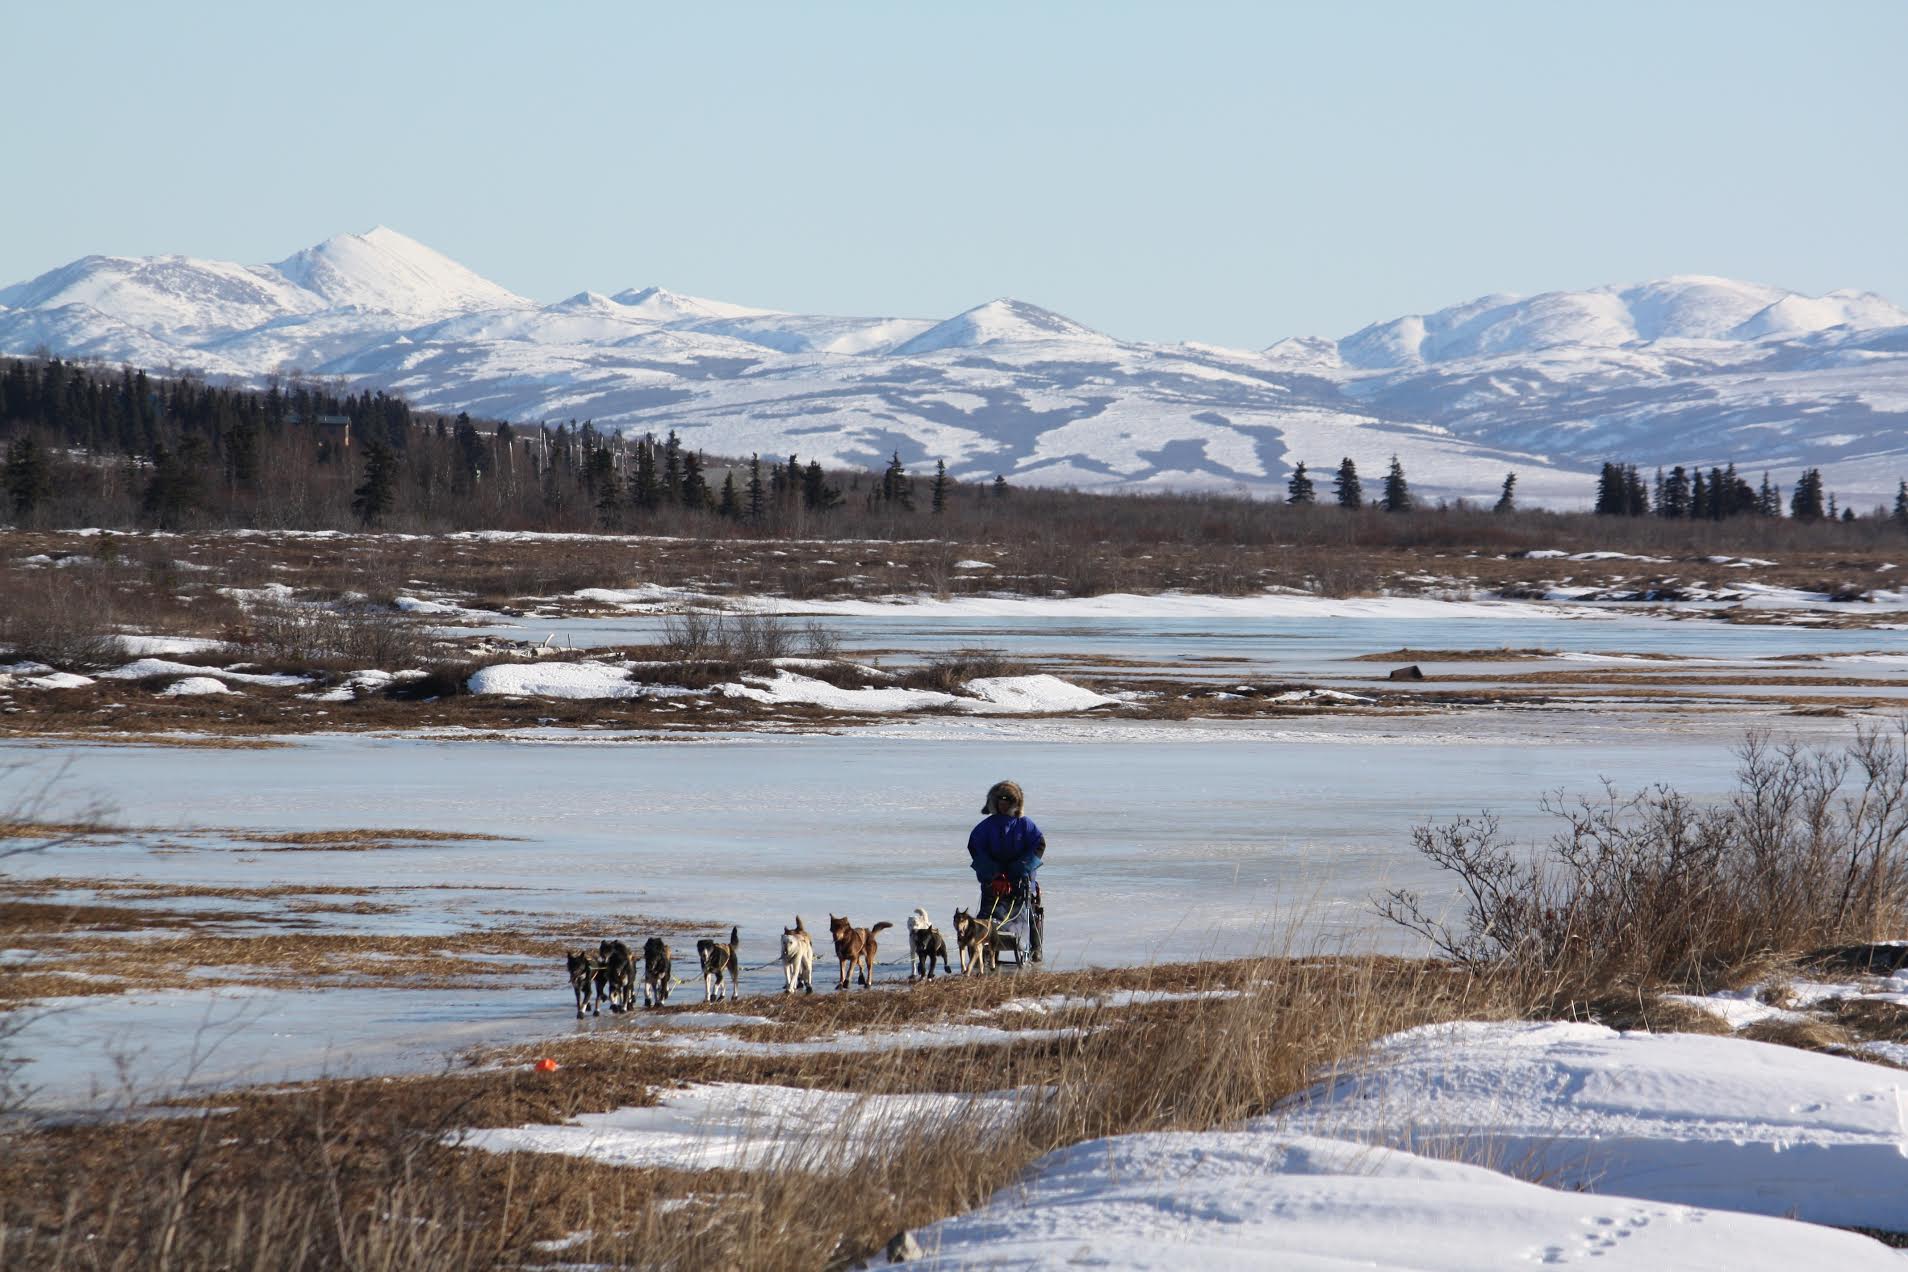 The lack of snowfall has hampered racers in the Iditarod as well as made hunting and travel between villages difficult. Photo by Fisher Dill